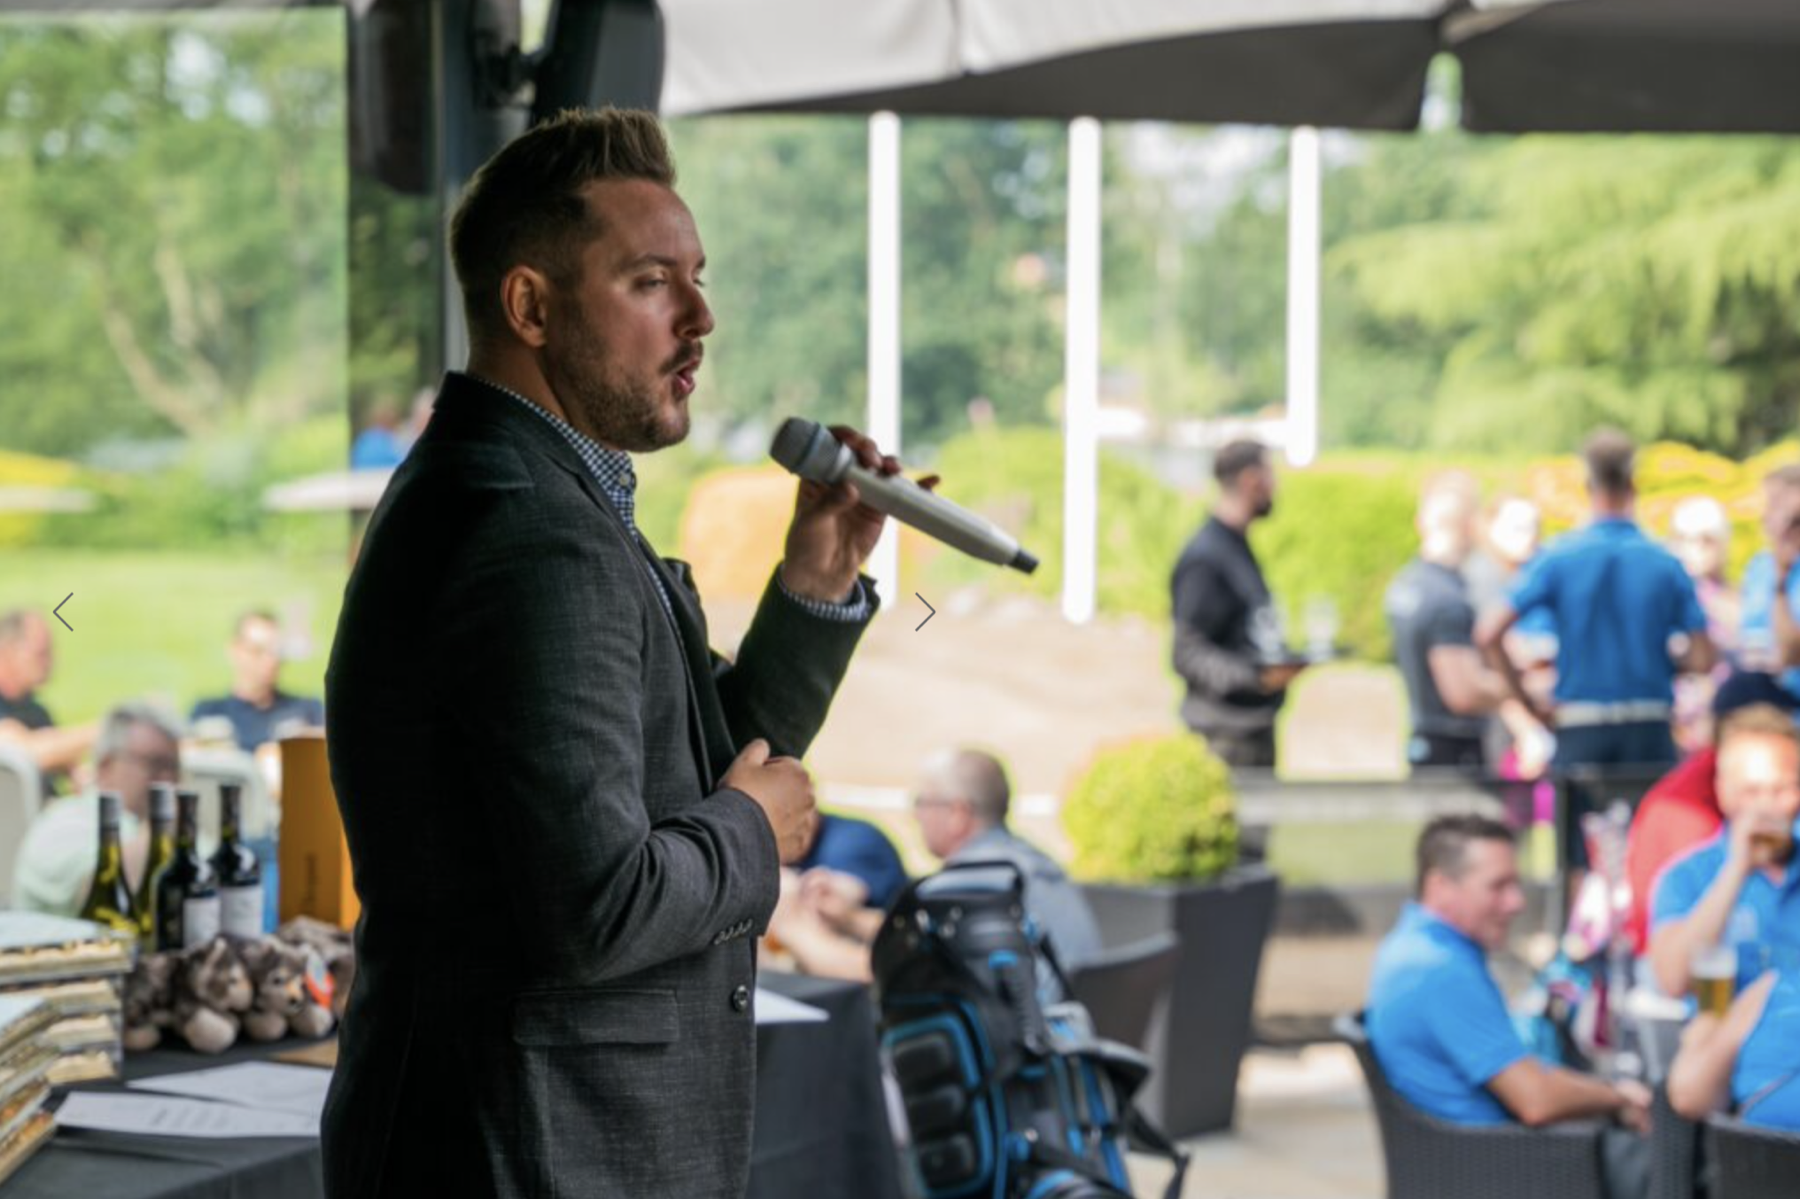  Manchester based singer, Alexander Stewart, entertains Swanky Swing guests ahead of the golf presentation 